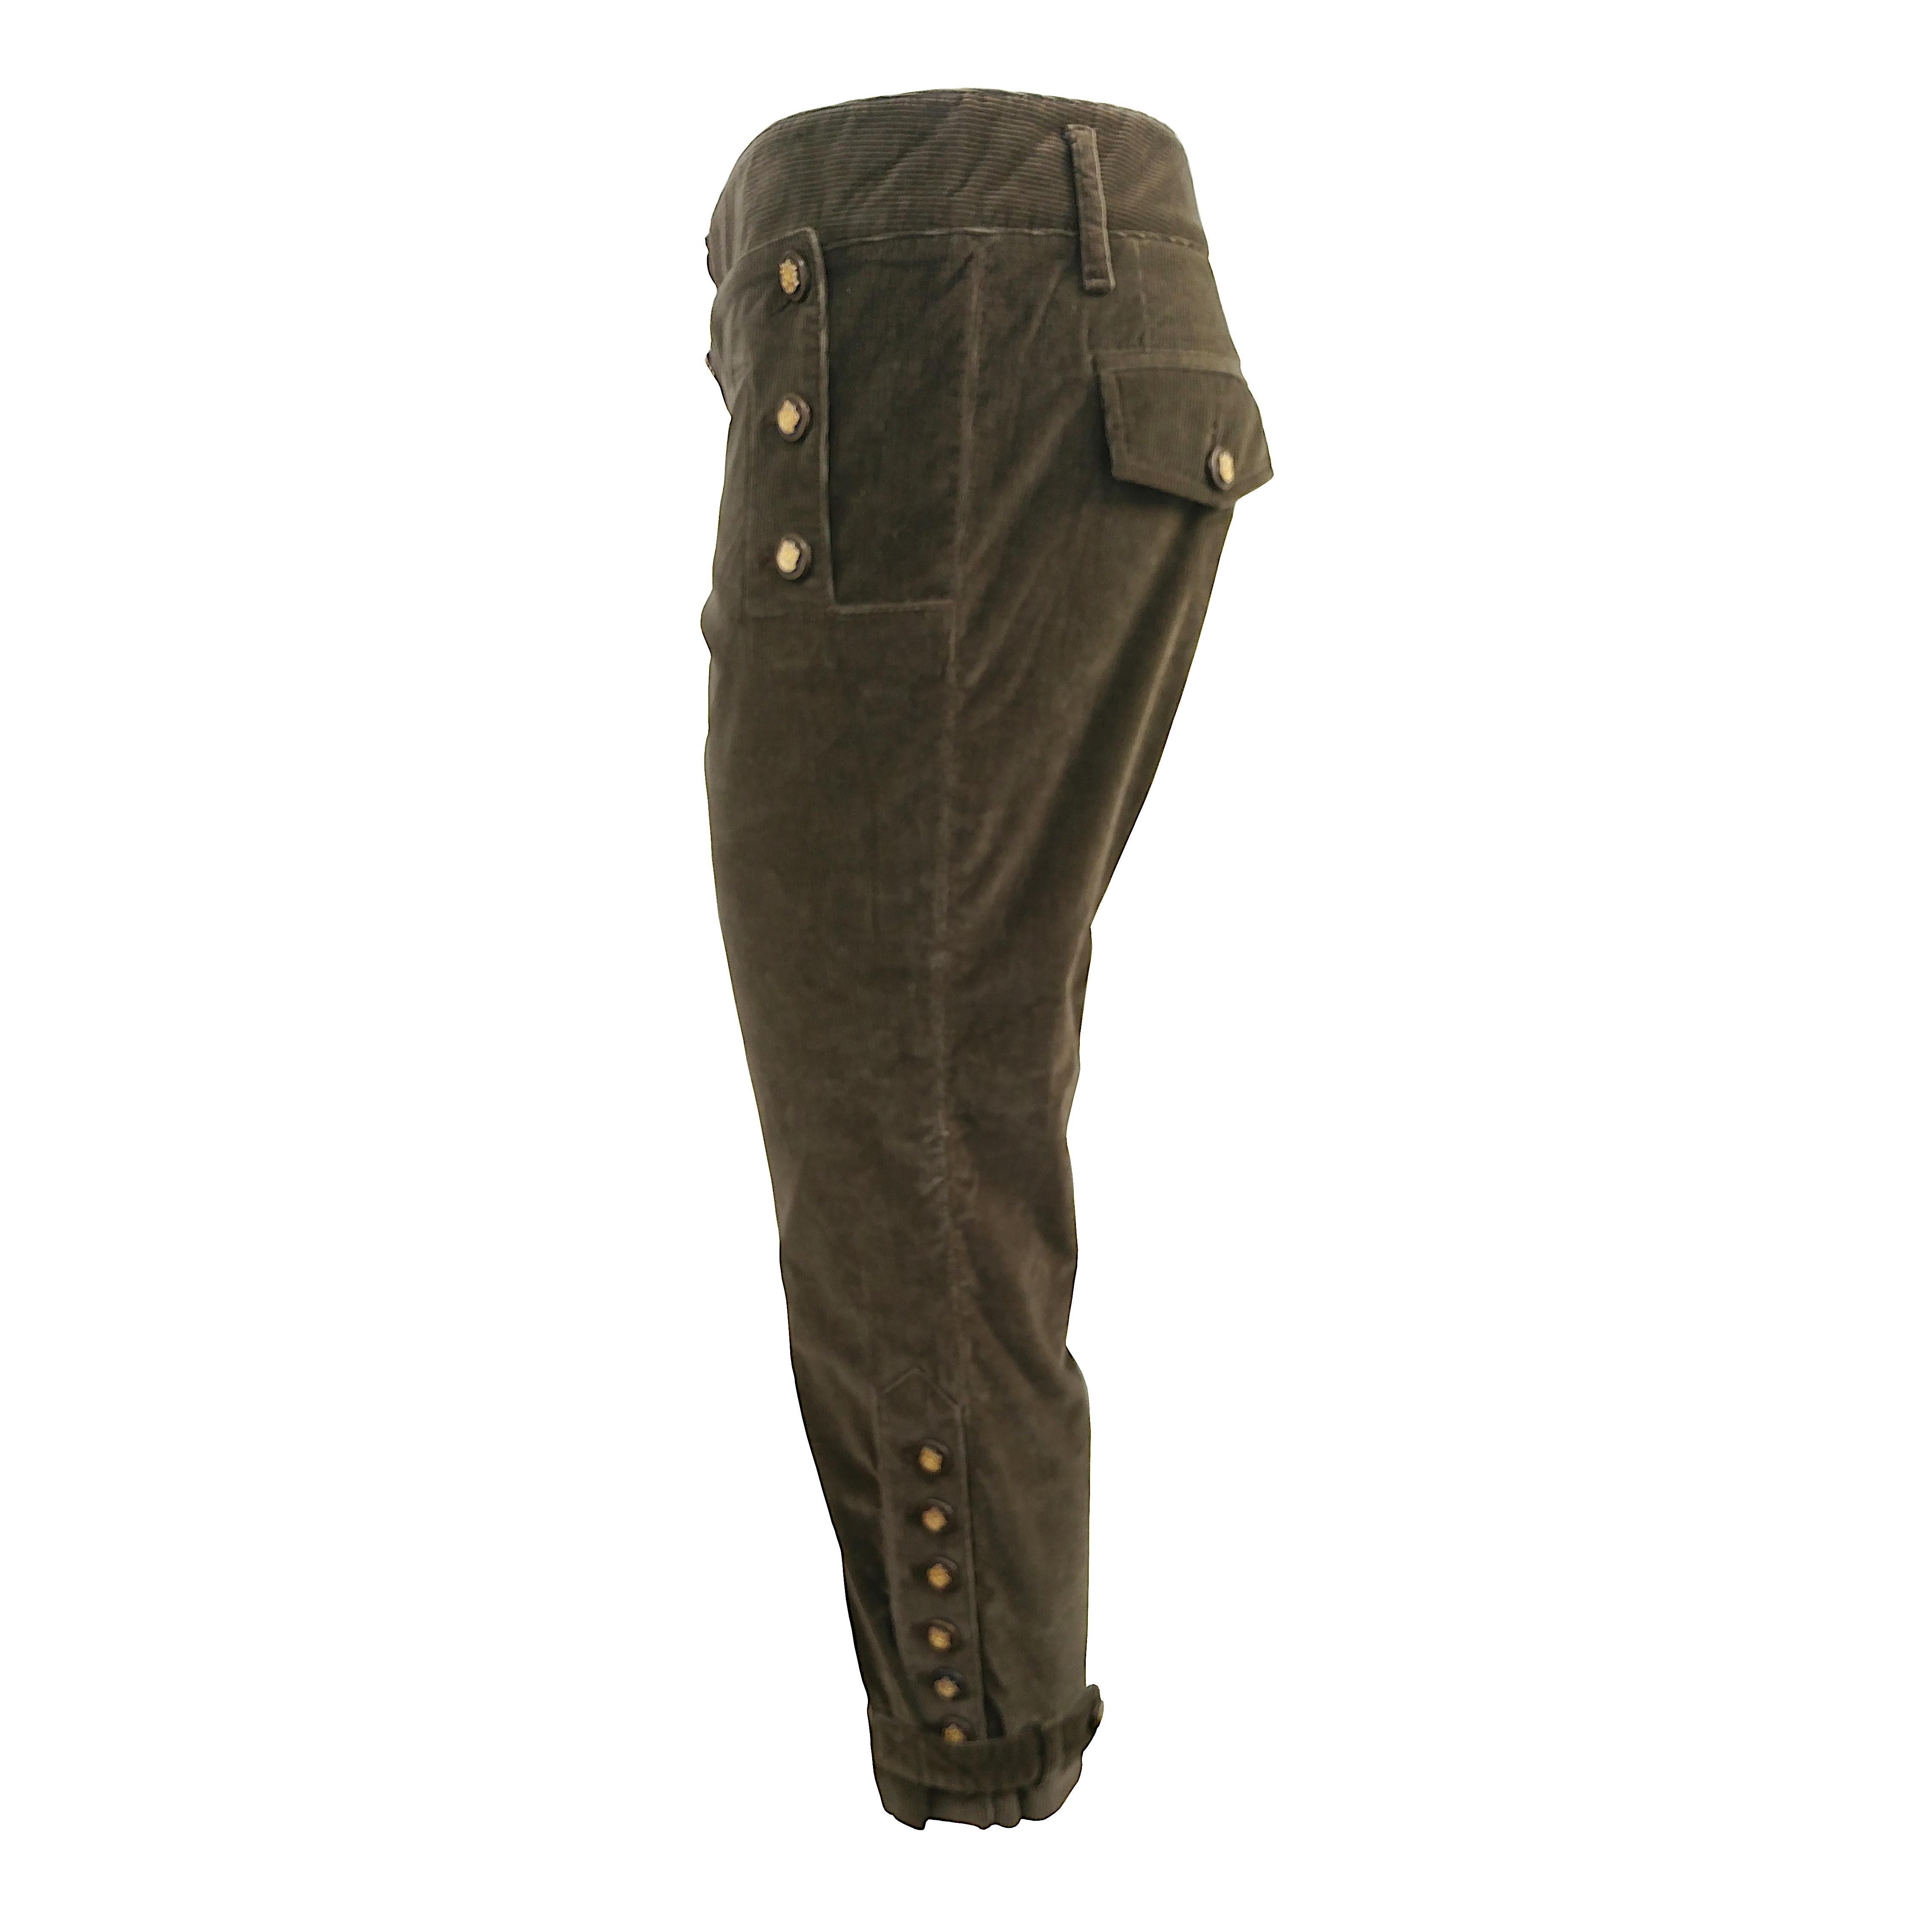 Introducing these Dolce&Gabbana 7/8 length pants, a unique blend of style and comfort. Crafted from olive green stretch cotton corduroy, these pants showcase a distinctive Tyrolean-inspired design. The textured fabric adds a touch of luxury, while